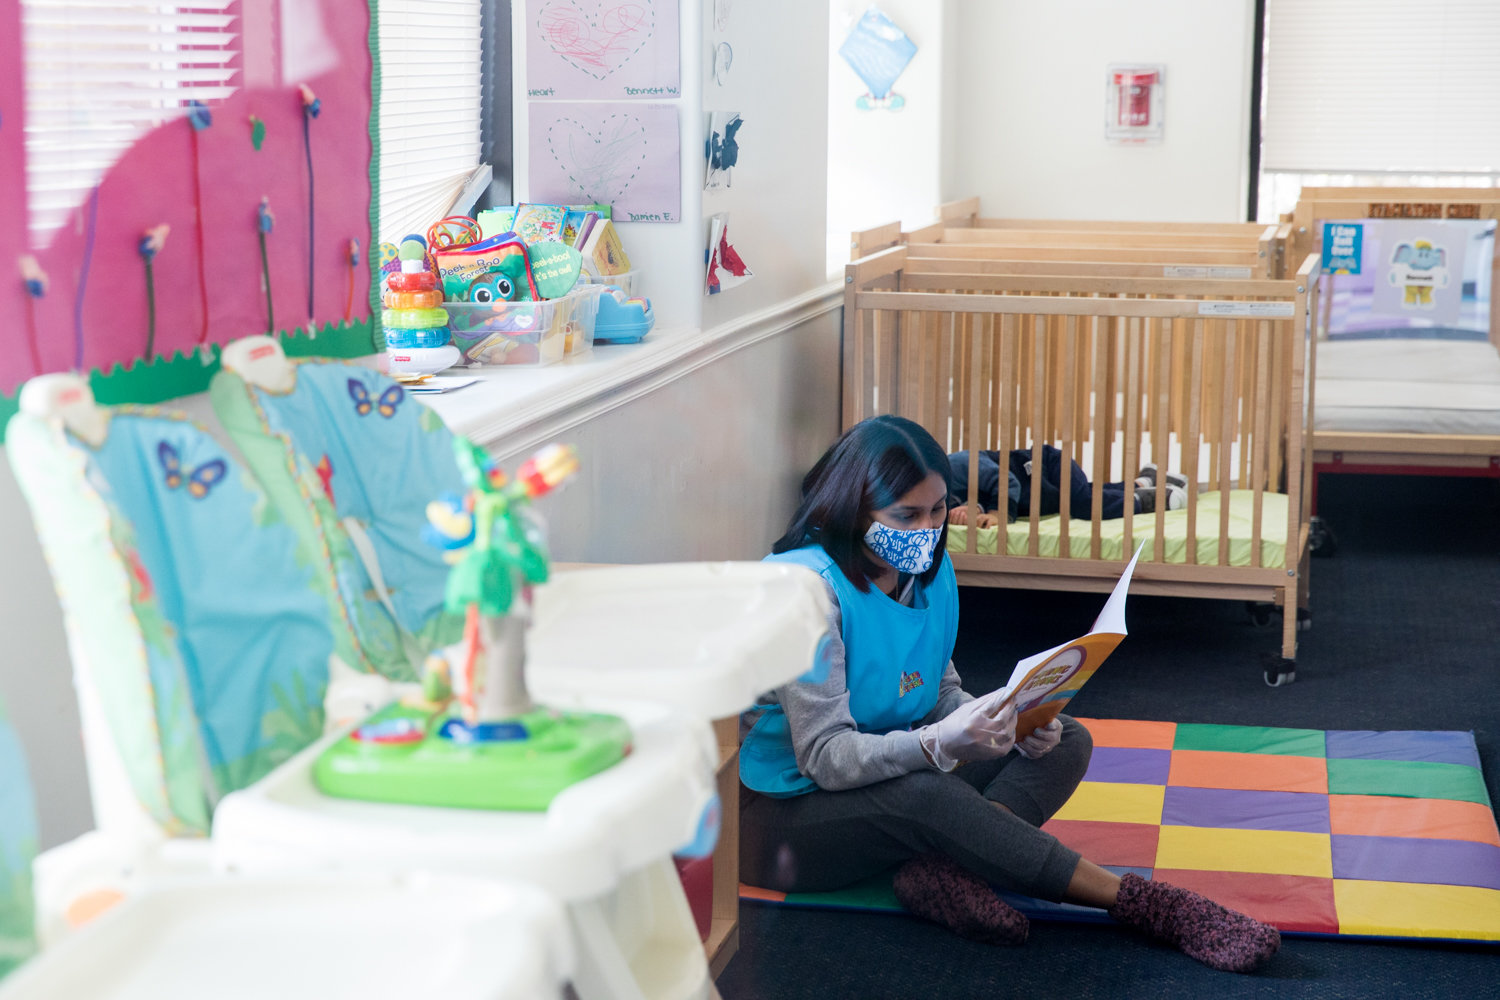 Lipsy Garcia, a teacher at The Learning Experience, looks through a book while children take a nap. The early childhood education center has retooled its services to provide day care for the children of essential workers during the coronavirus pandemic.